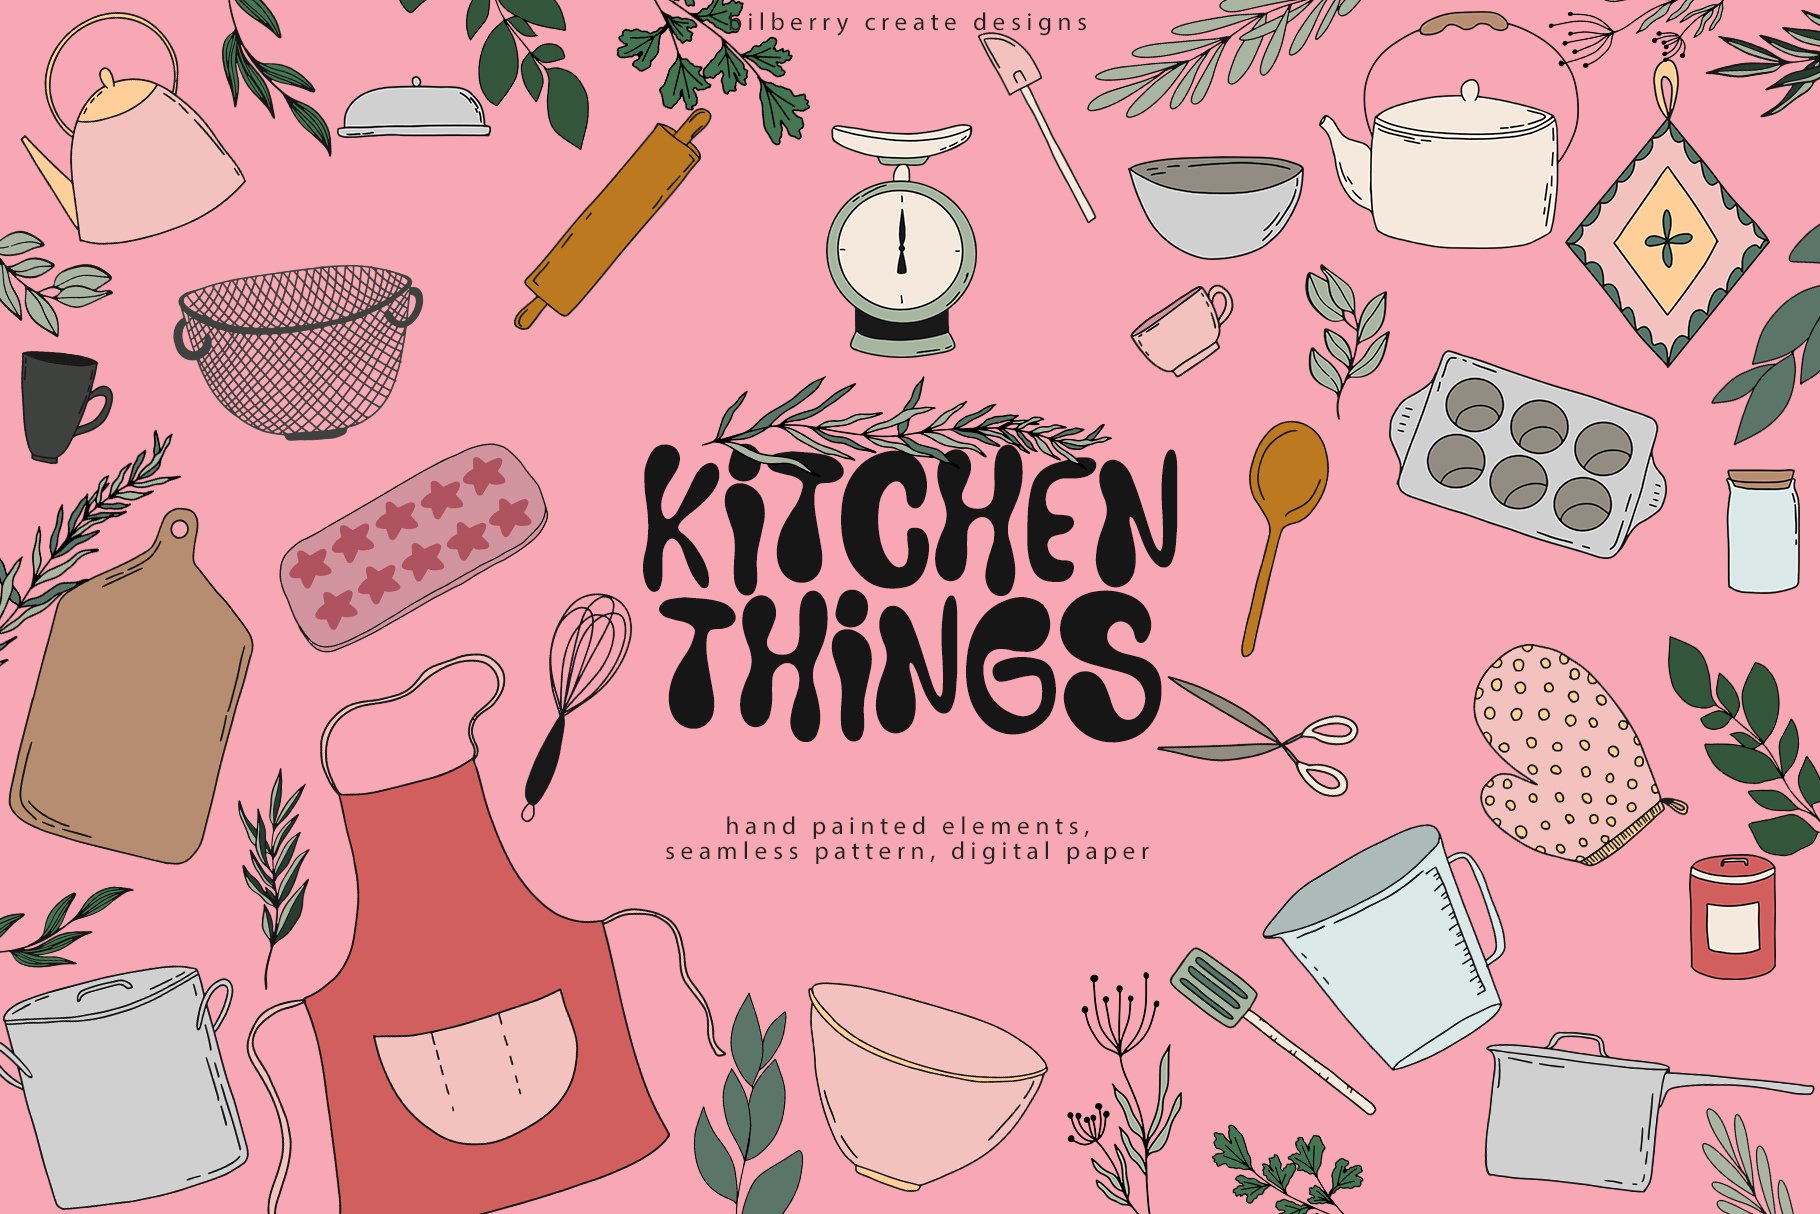 Kitchen things art set cover image.